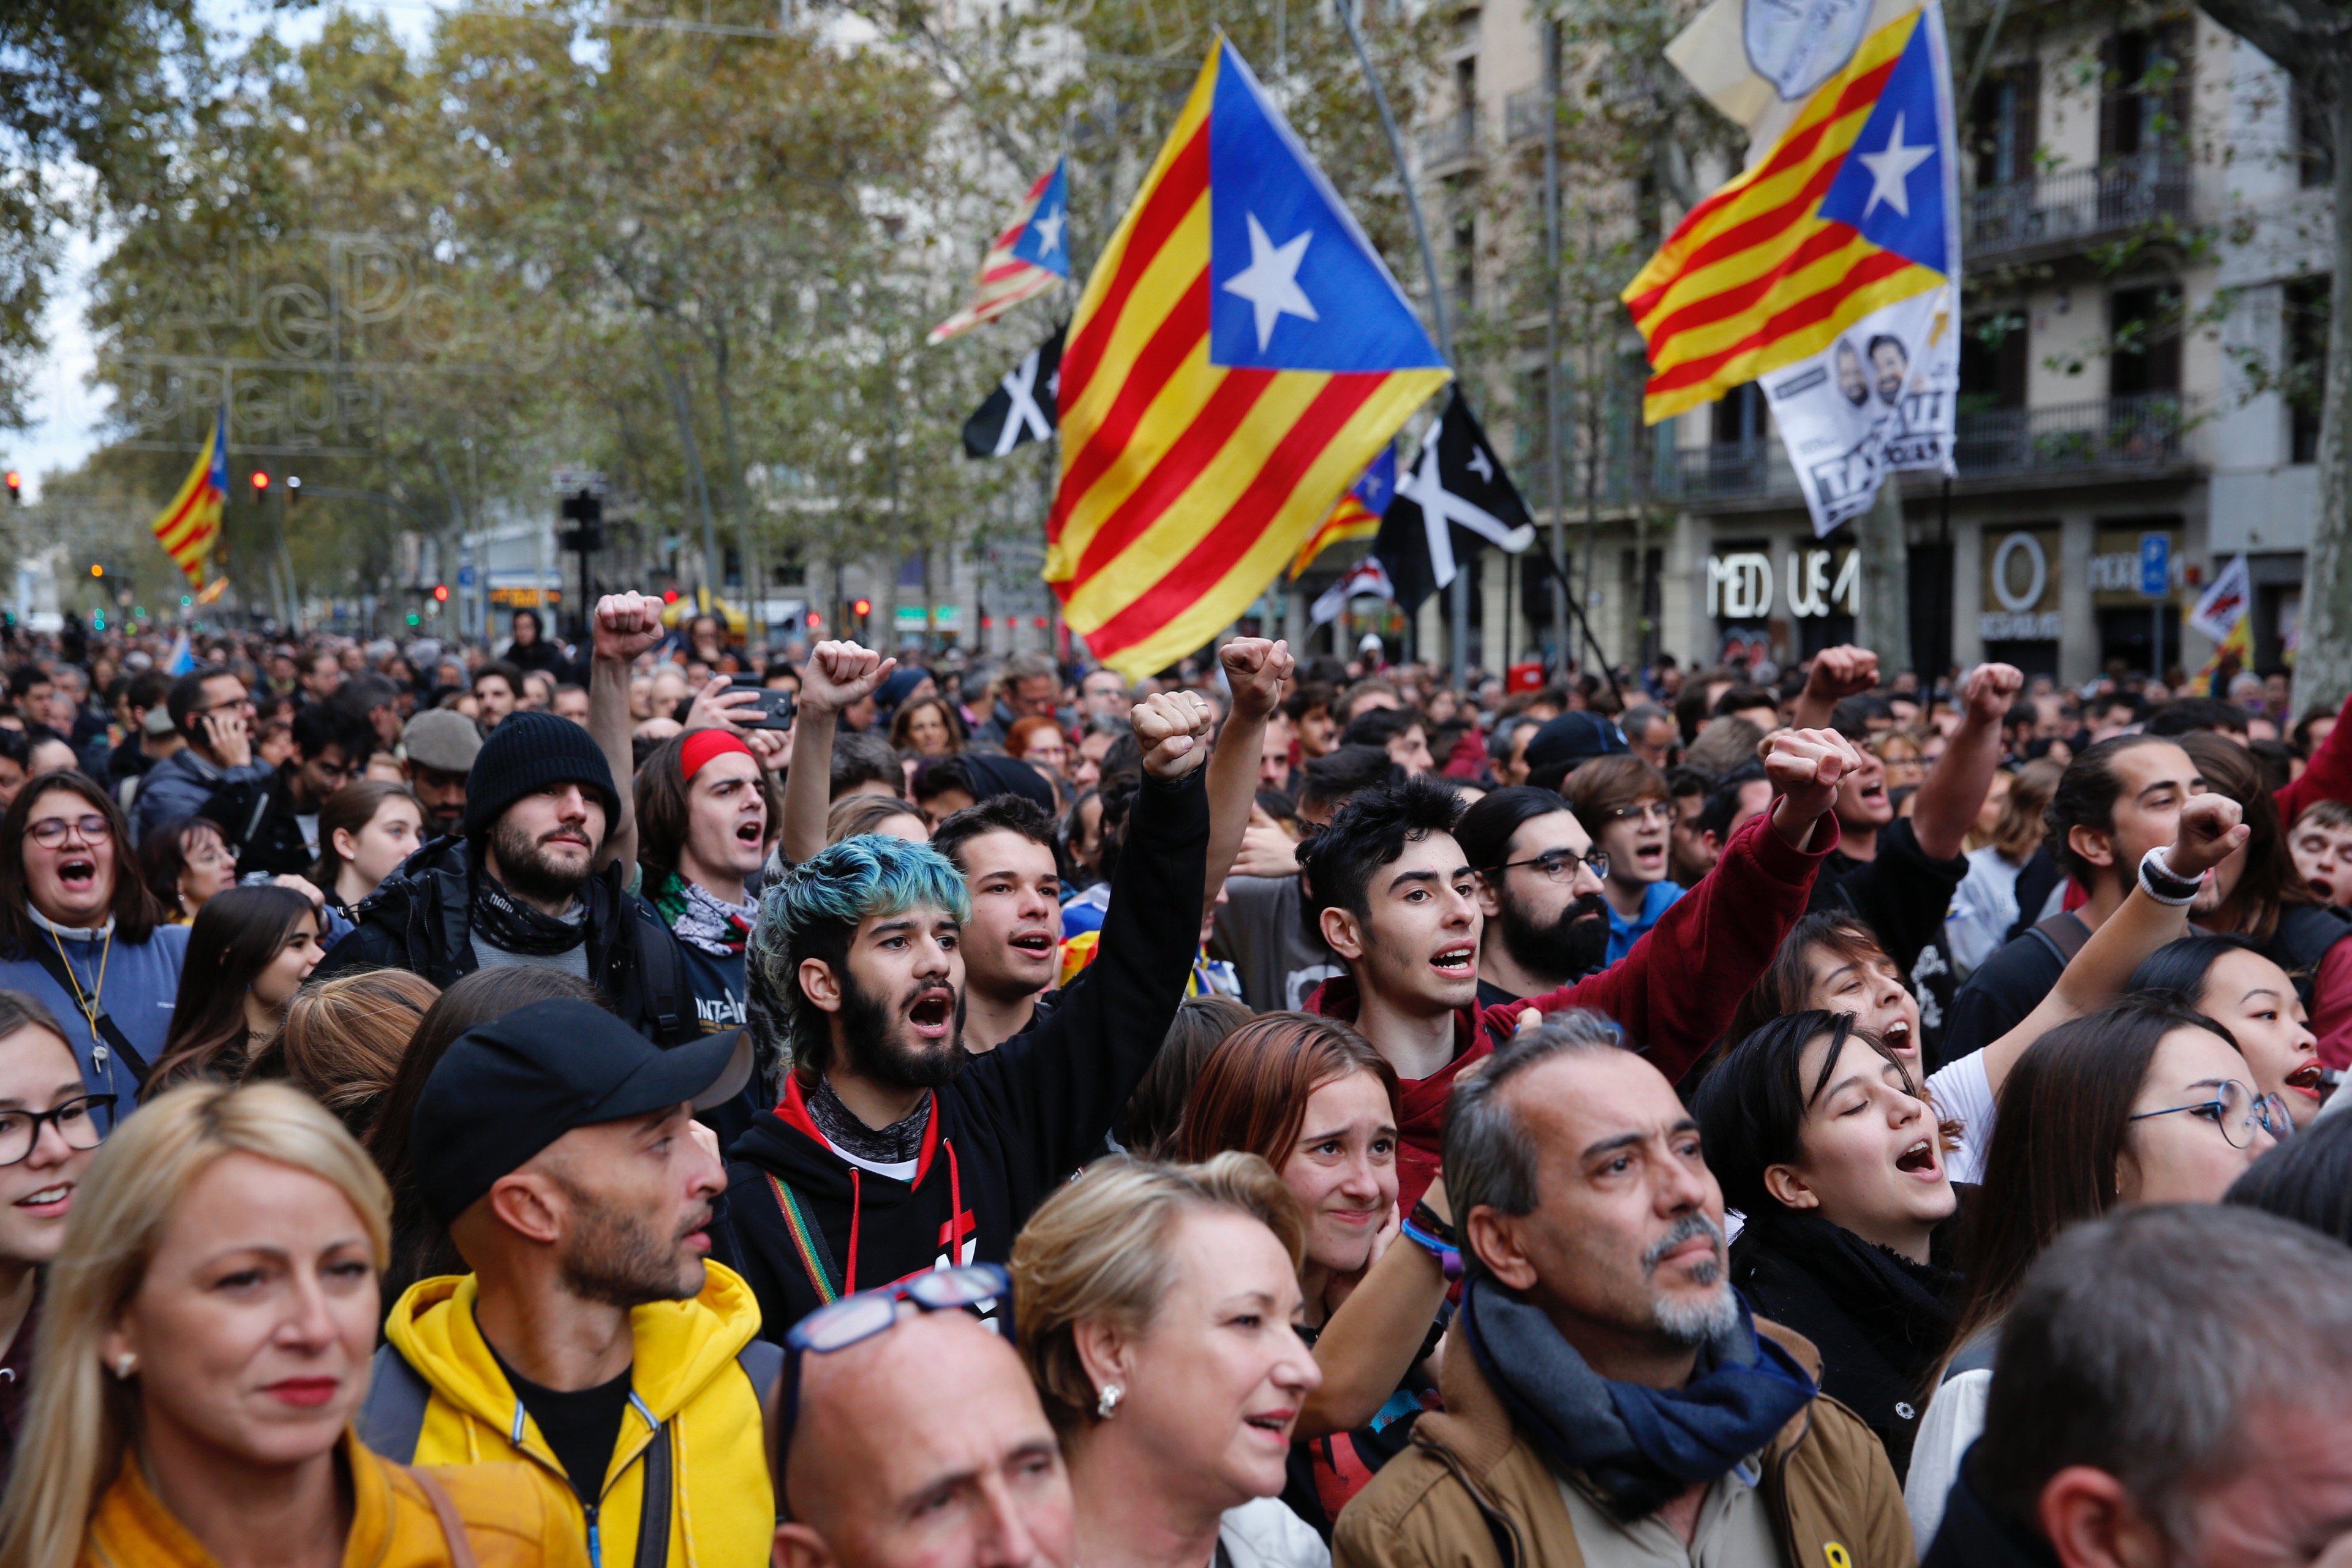 Concerts and chants fill central Barcelona on Spain's "day of reflection"